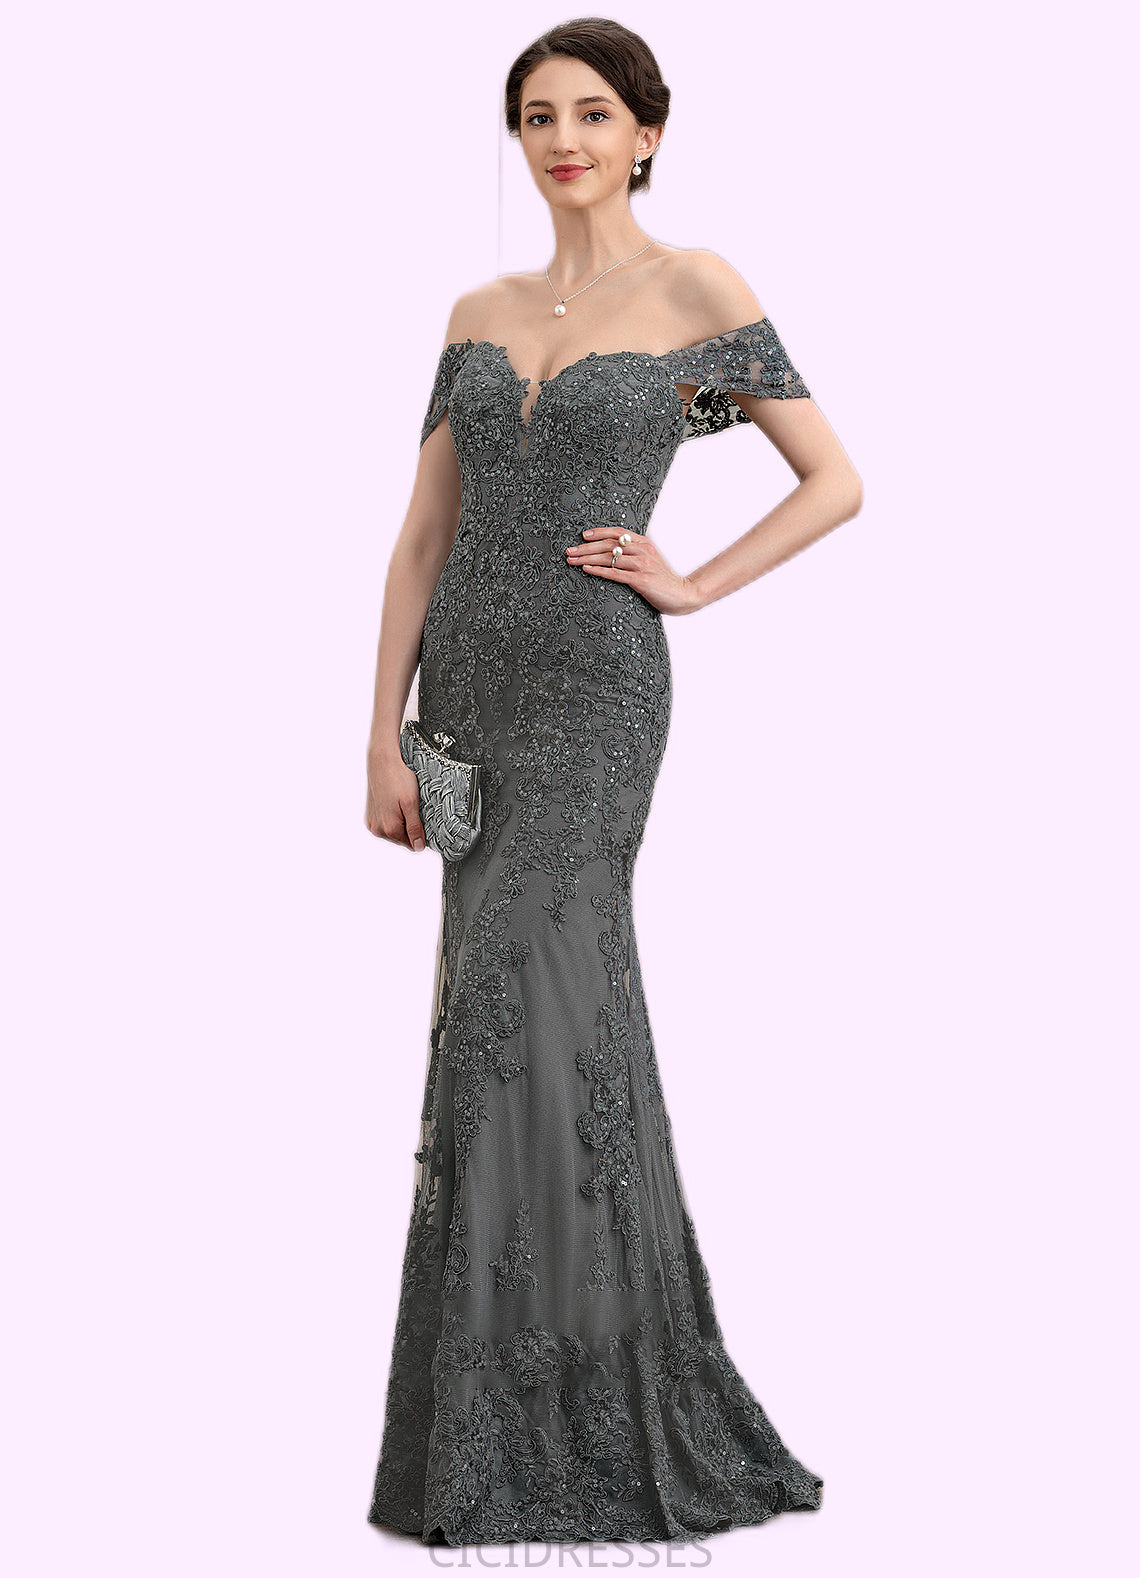 Paisley Trumpet/Mermaid Off-the-Shoulder Floor-Length Tulle Lace Mother of the Bride Dress With Sequins CIC8126P0014731